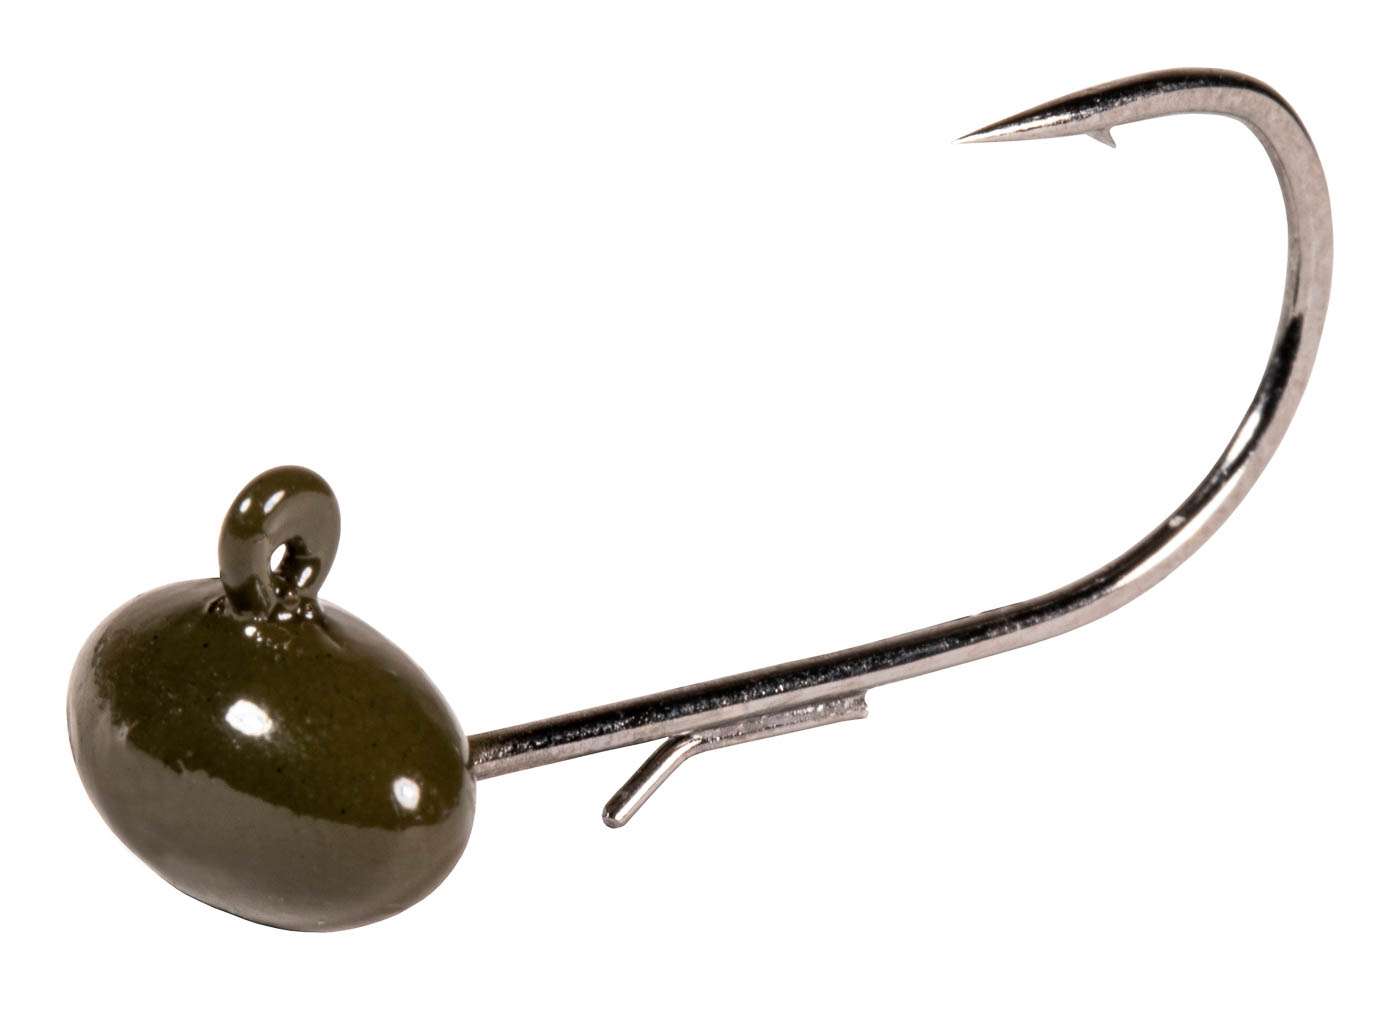 <p><strong>Z-Man Football NedZ Jigheads</strong></p><p>A custom medium wire 1/0 black nickel hook makes rigging finesse baits easier, while a unique welded wire keeper locks them securely to the shank. An oblong, precision-cut football jighead drags seamlessly across rock and other terrain, pivoting, sliding over and activating the bait as it contacts obstructions. A perfectly match for Hula StickZ, Finesse TRD, Baby GOAT, TRD BugZ and other popular ElaZtech finesse baits. Offered in 1/8-, 3/16- and 1/4-ounce sizes in Green Pumpkin and Black finishes. $5.99 per 3 pack. <a href=